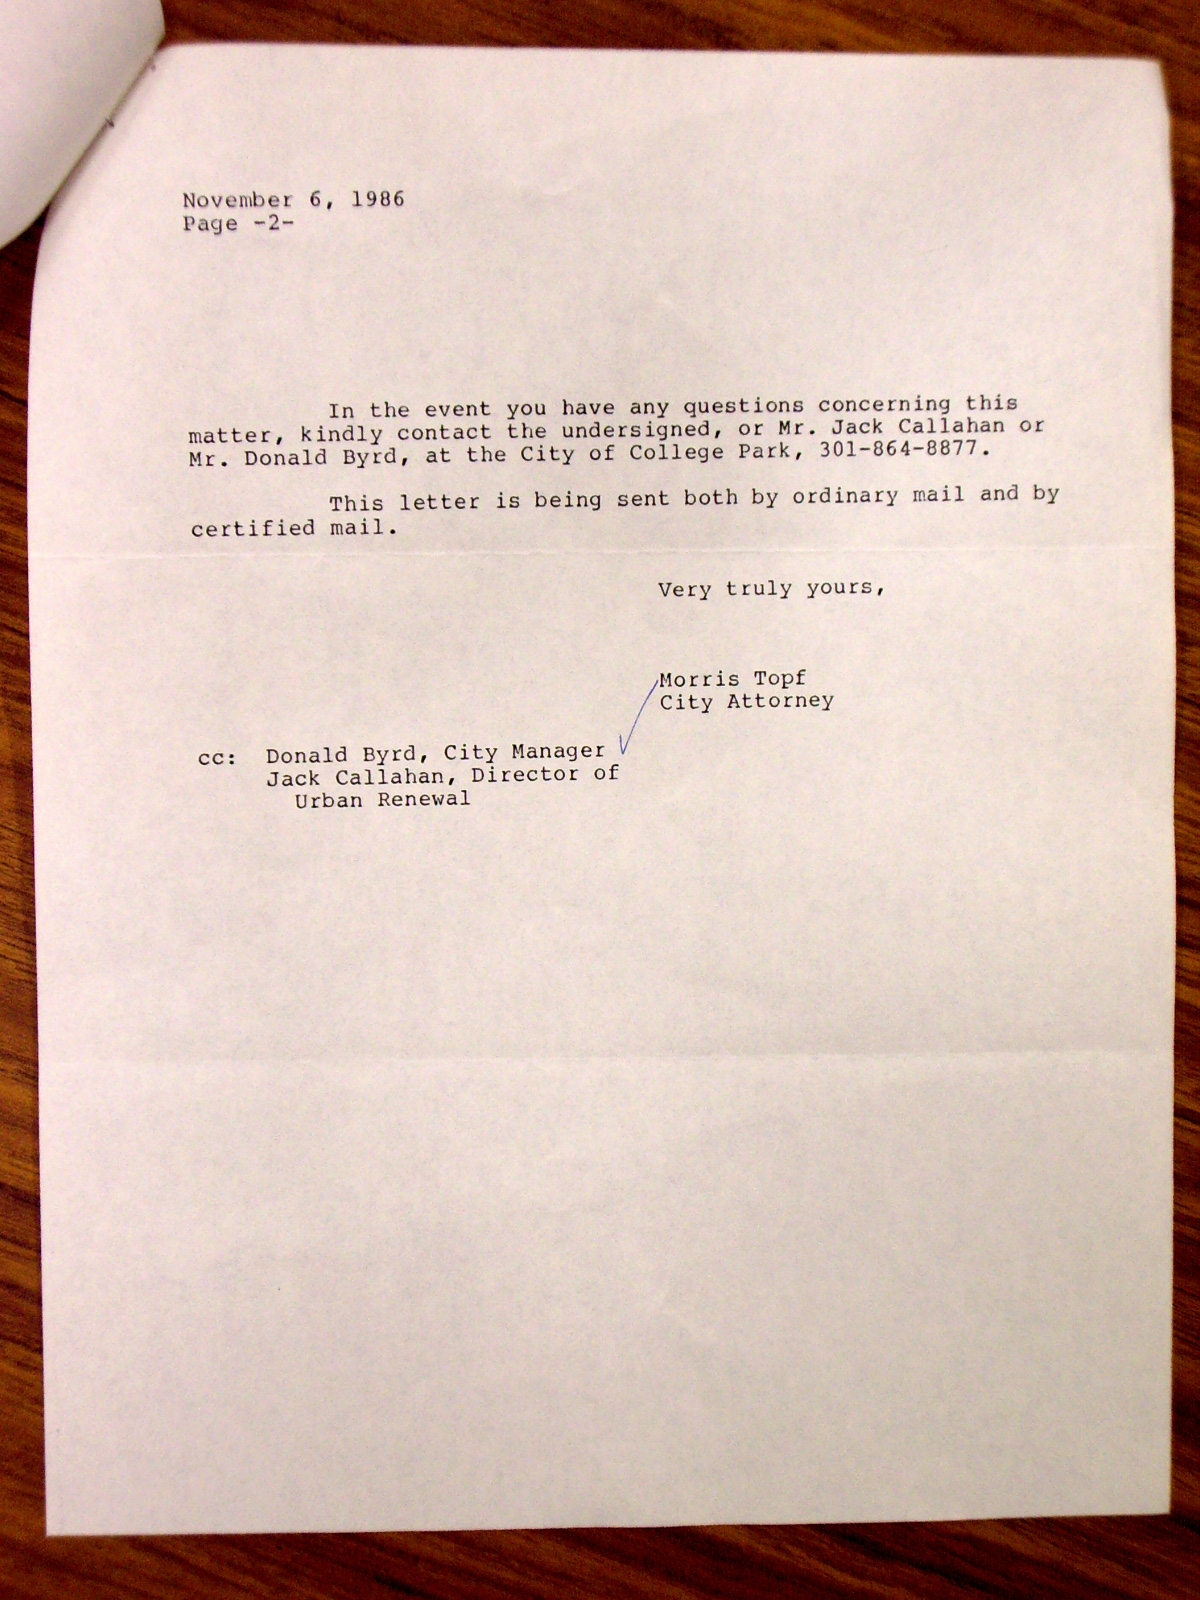 Letter from Morris Topf to Washington City Church of the Brethren, W. Earl Weygandt and Metrix Excavating, Inc